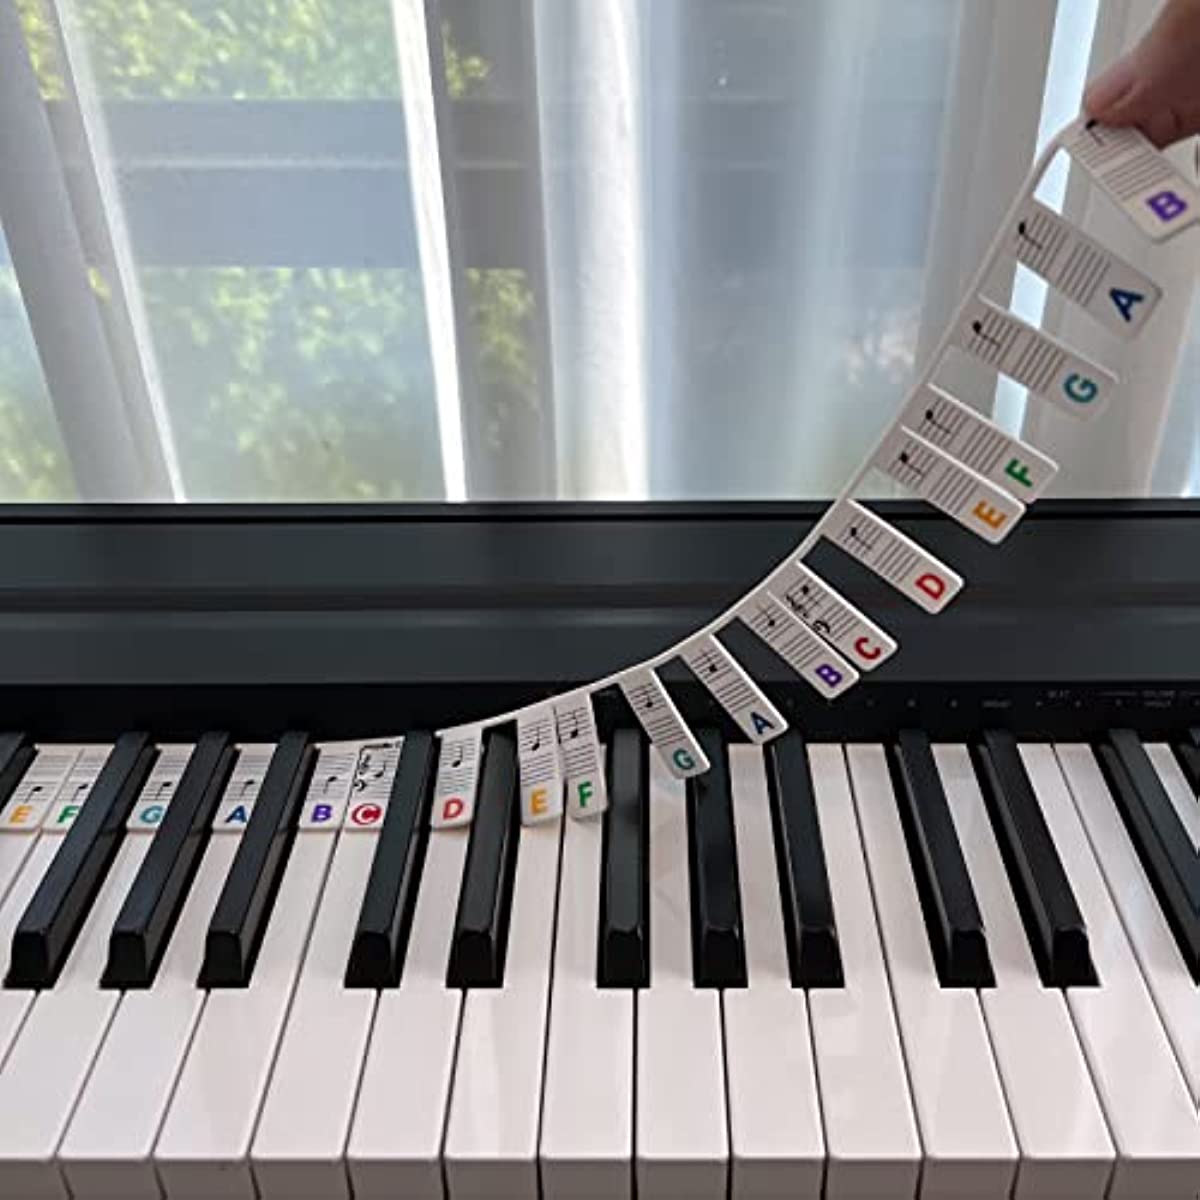 1pc Beginner's Piano Note Guide, Detachable Learning Piano Keyboard Note  Label, 88 Key Full Size, Made Of Silicone, No Stickers Required, Reusable